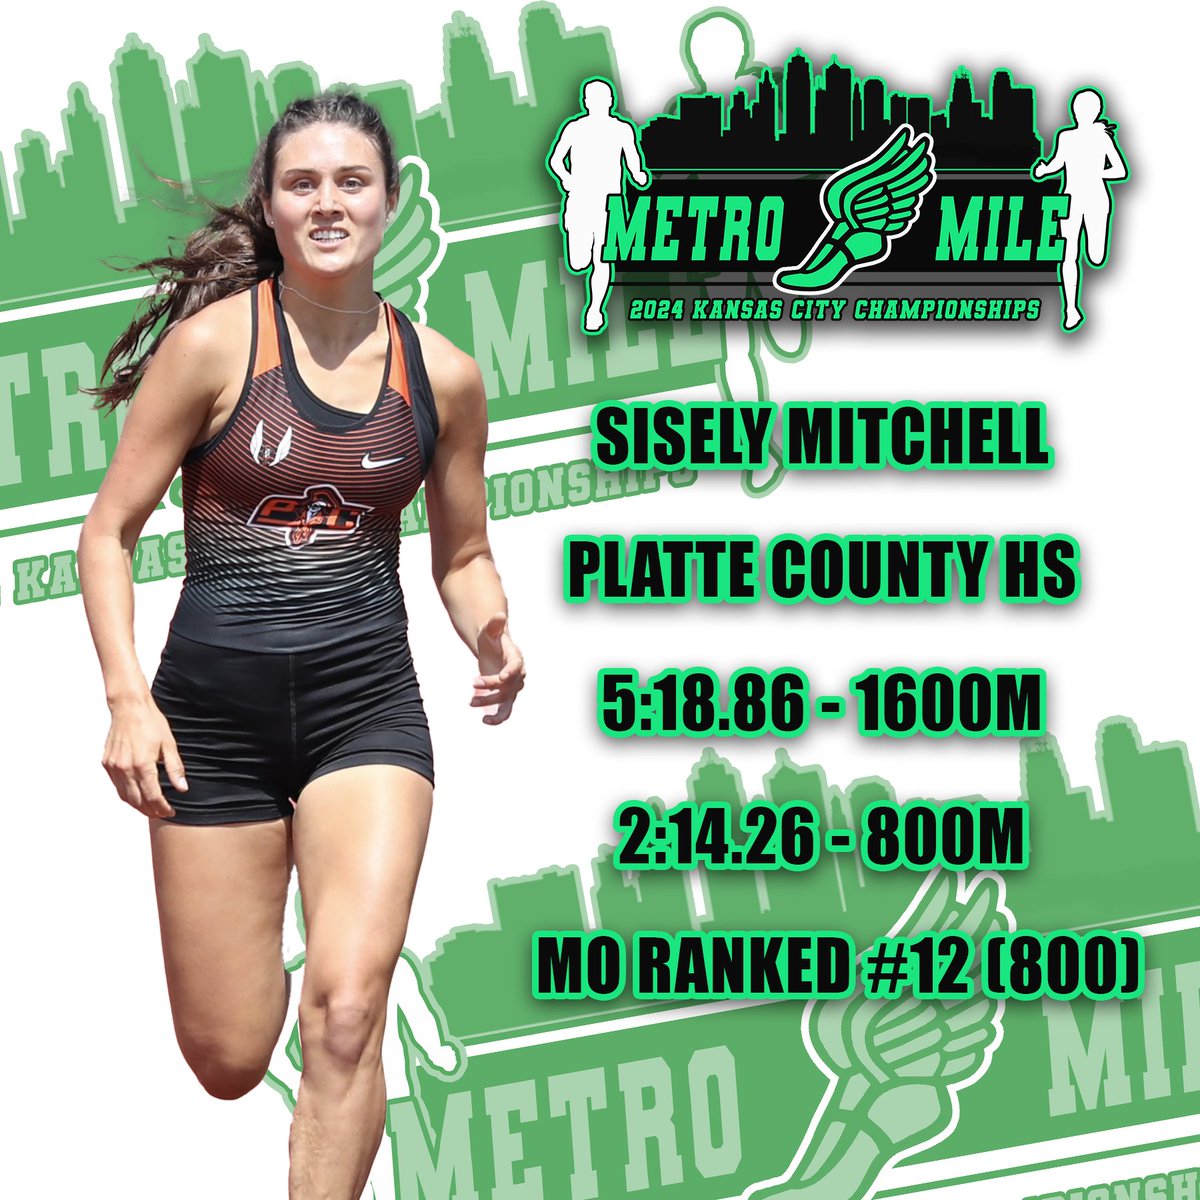 Commitment Alert! Sisely Mitchell is fresh off a 6th place finish in the 800 at the MO class 5 state championship! She set new PR's of 5:18 and 2:14 this spring and finished the season ranked #12 in Missouri in the 800! @PCHSTrack_Field @SiselyMitchell @PCPrepsExtra